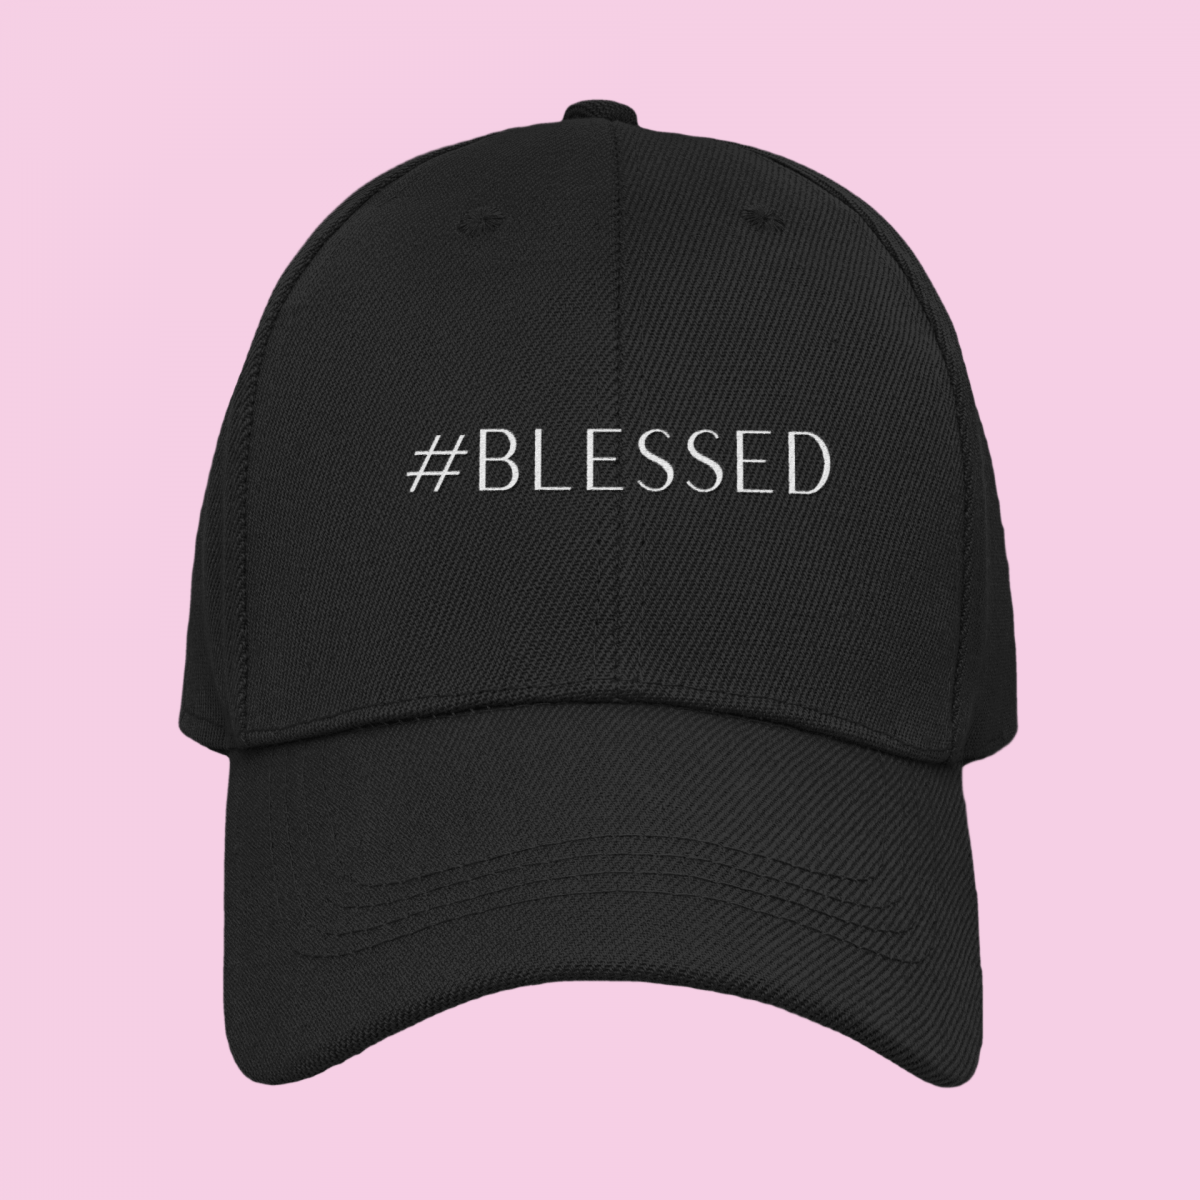 "#blessed"